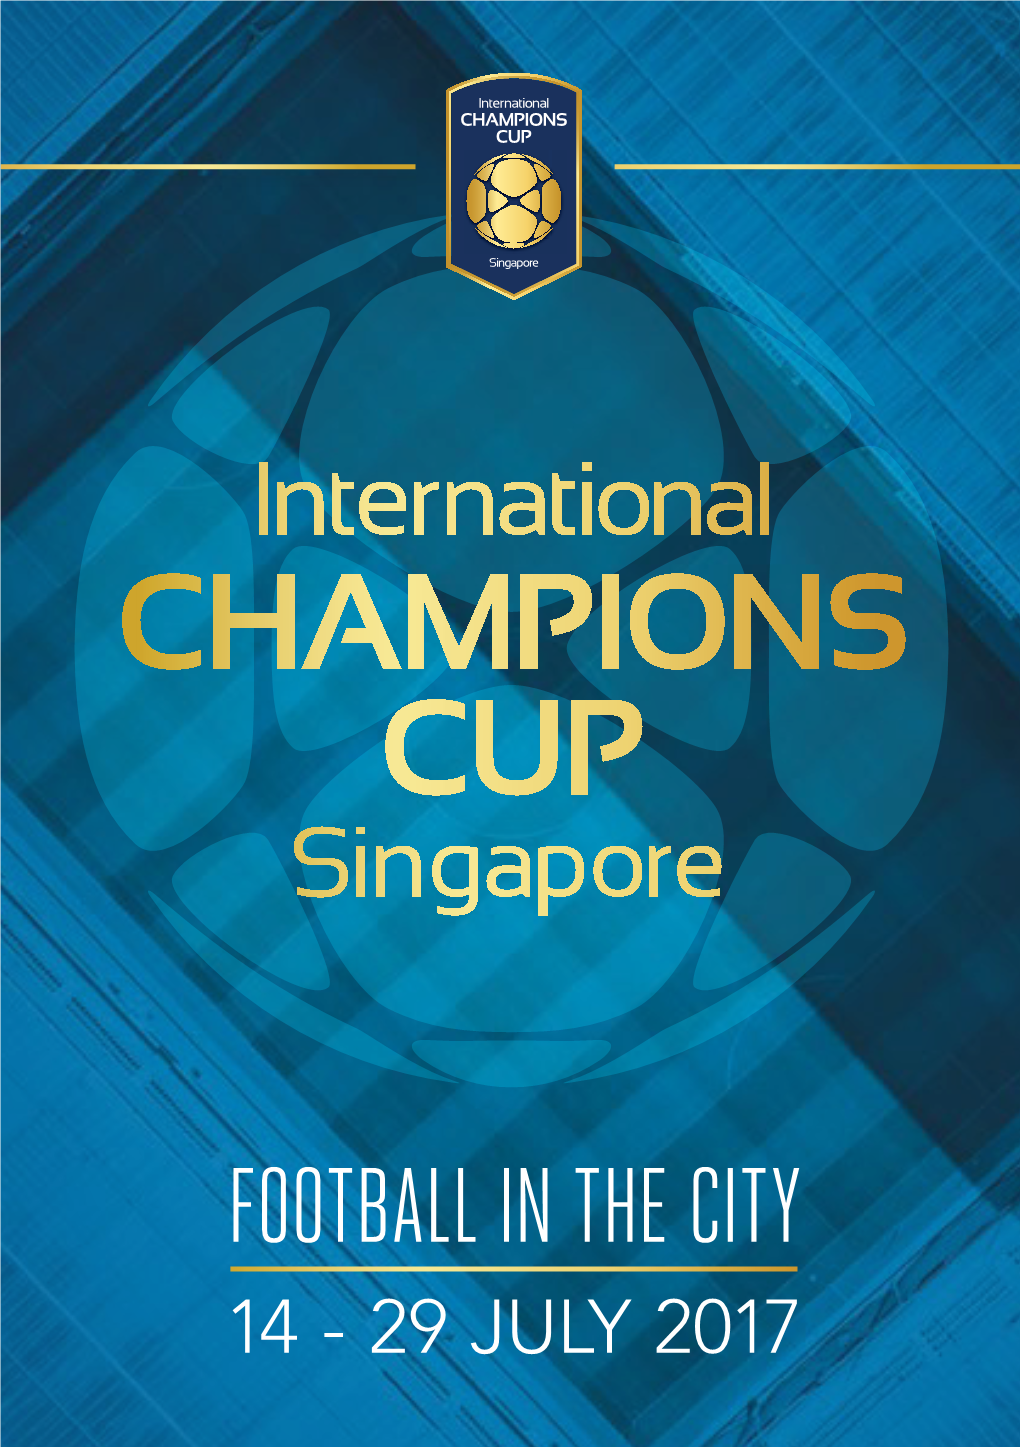 Football in the City 14 - 29 July 2017 Football Fans, Welcome to Singapore